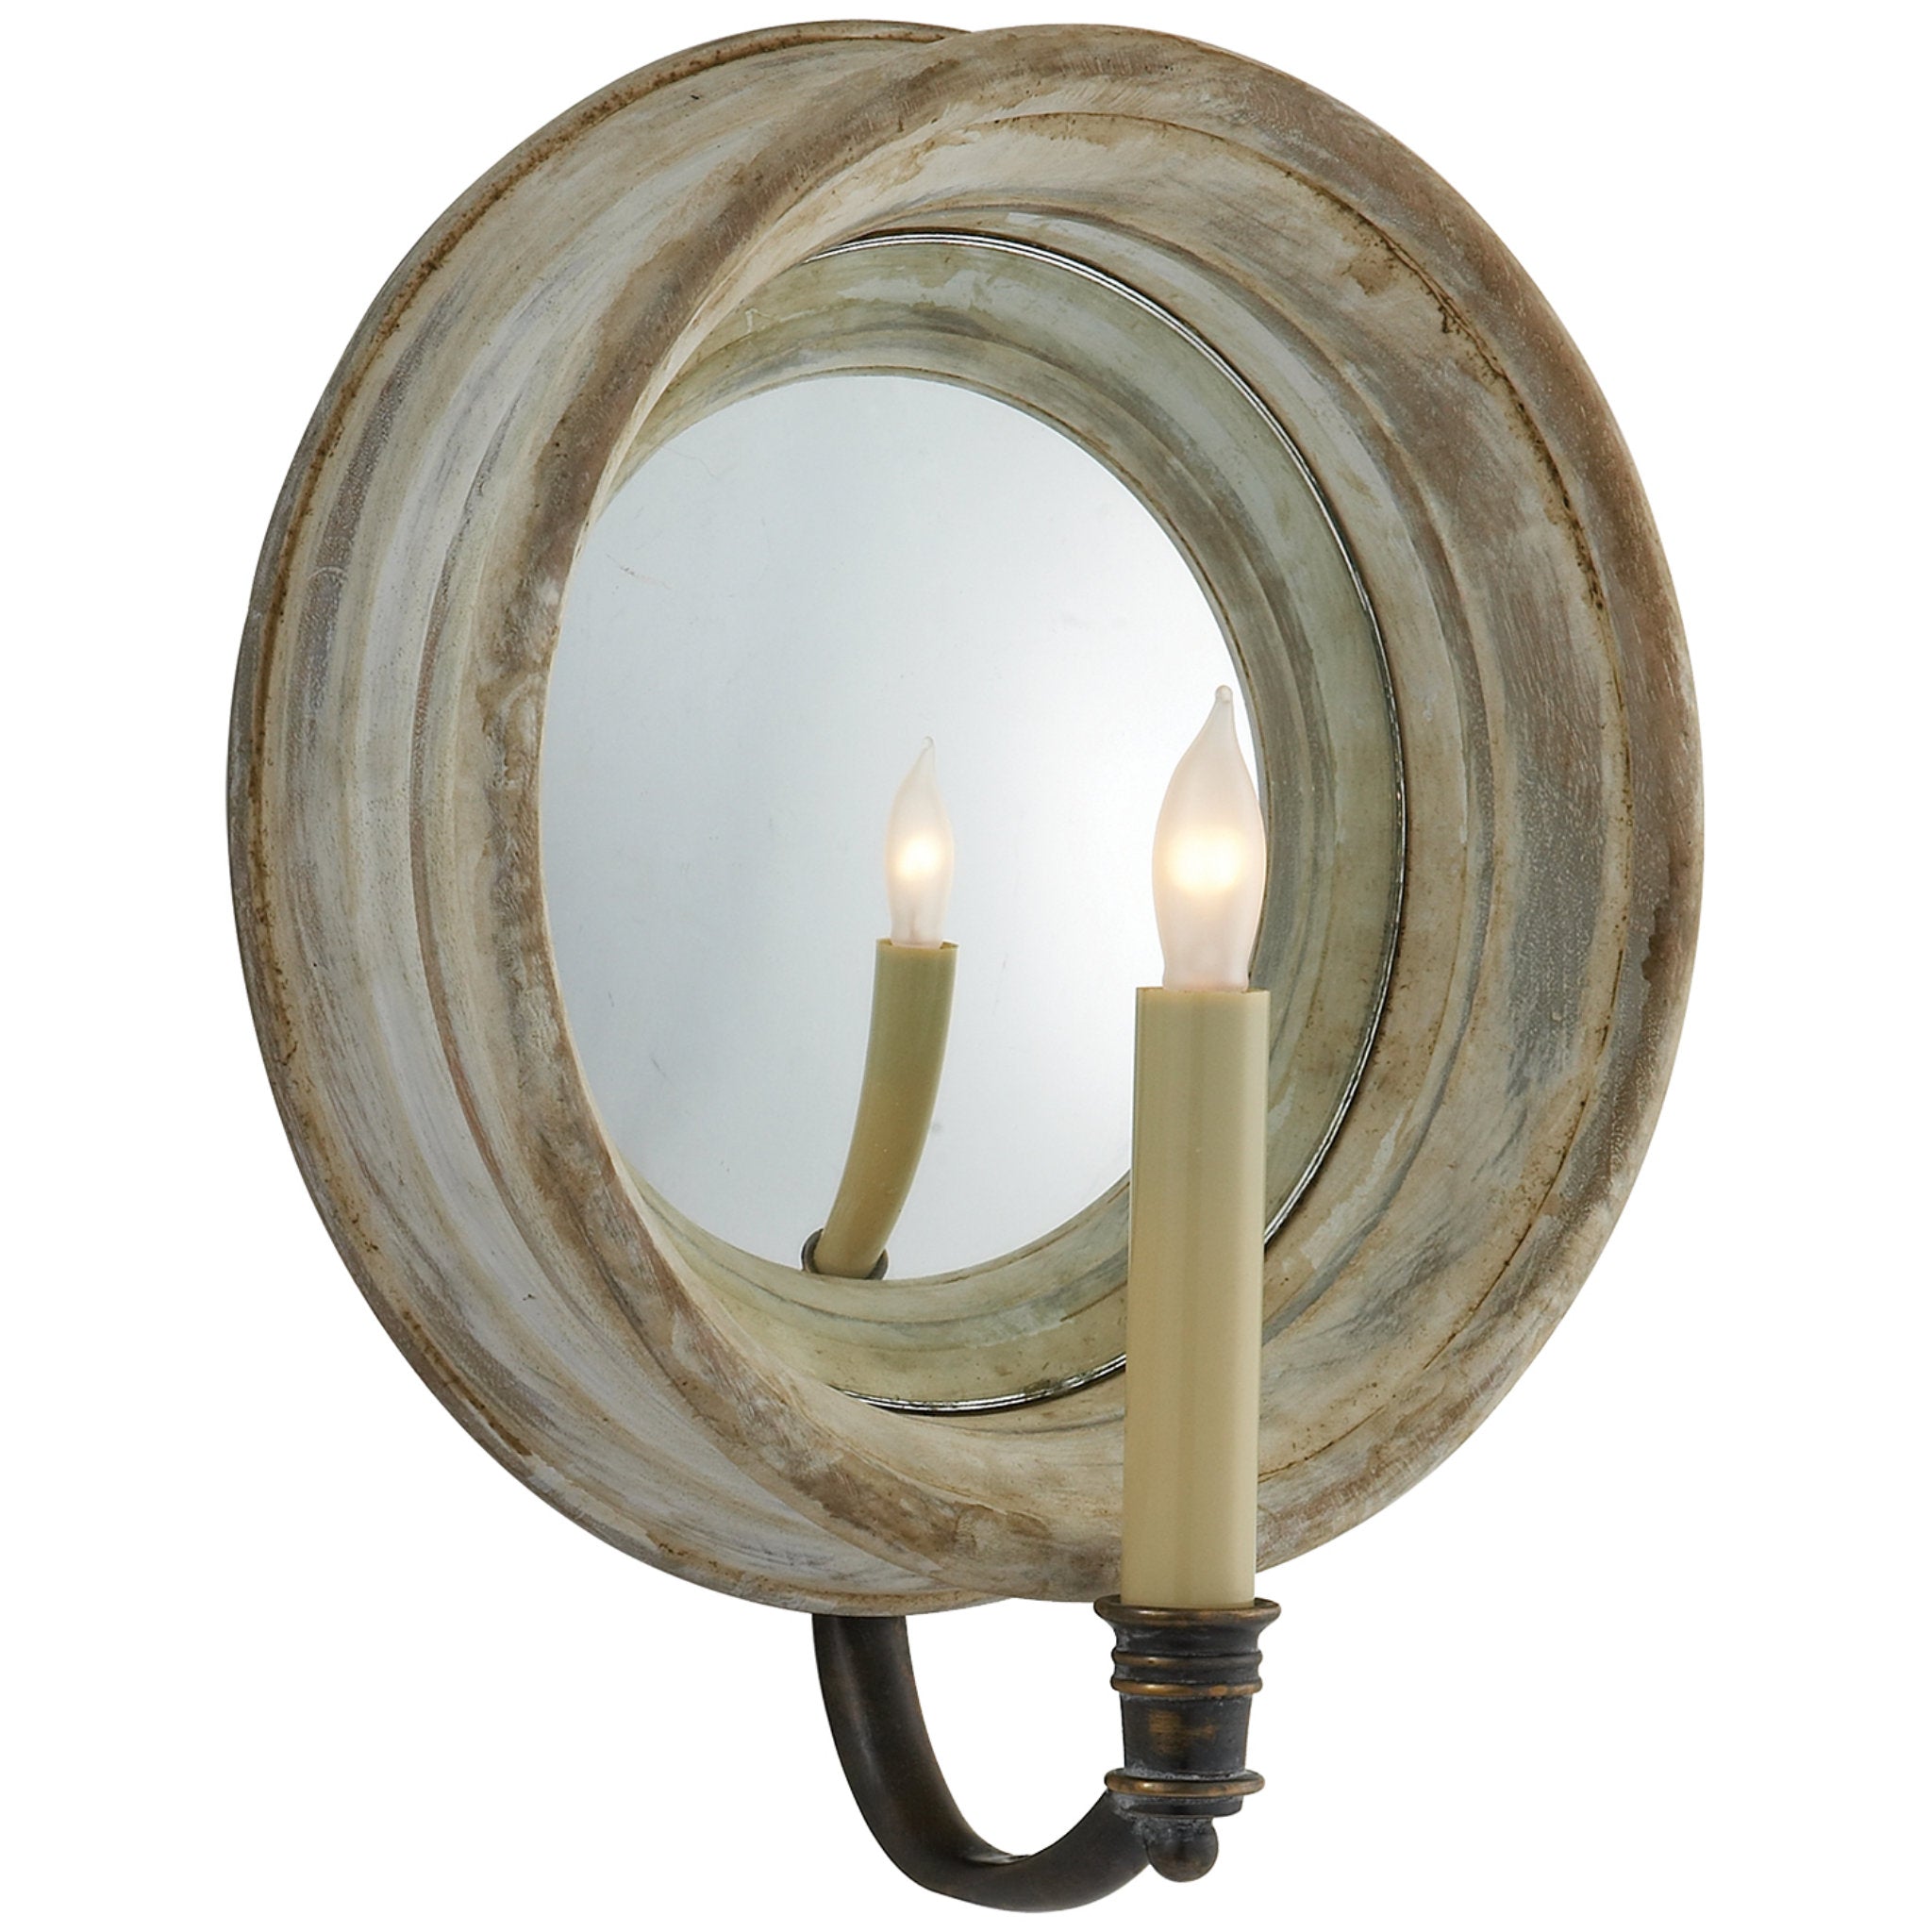 Chapman & Myers Chelsea Medium Reflection Sconce in Old White